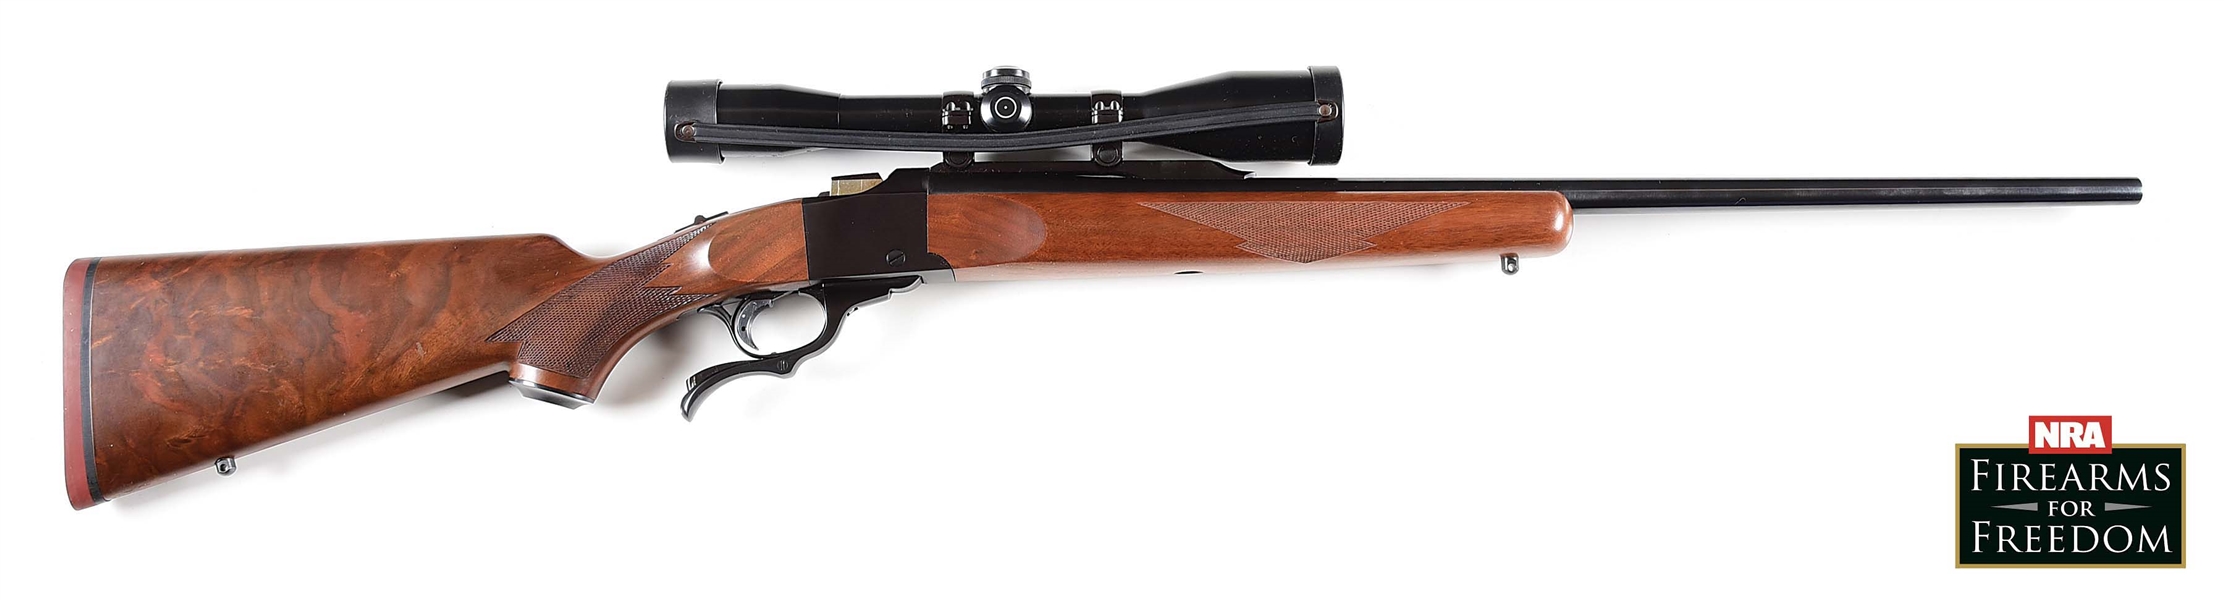 (M) RUGER NO. 1 SINGLE SHOT RIFLE .218 BEE.